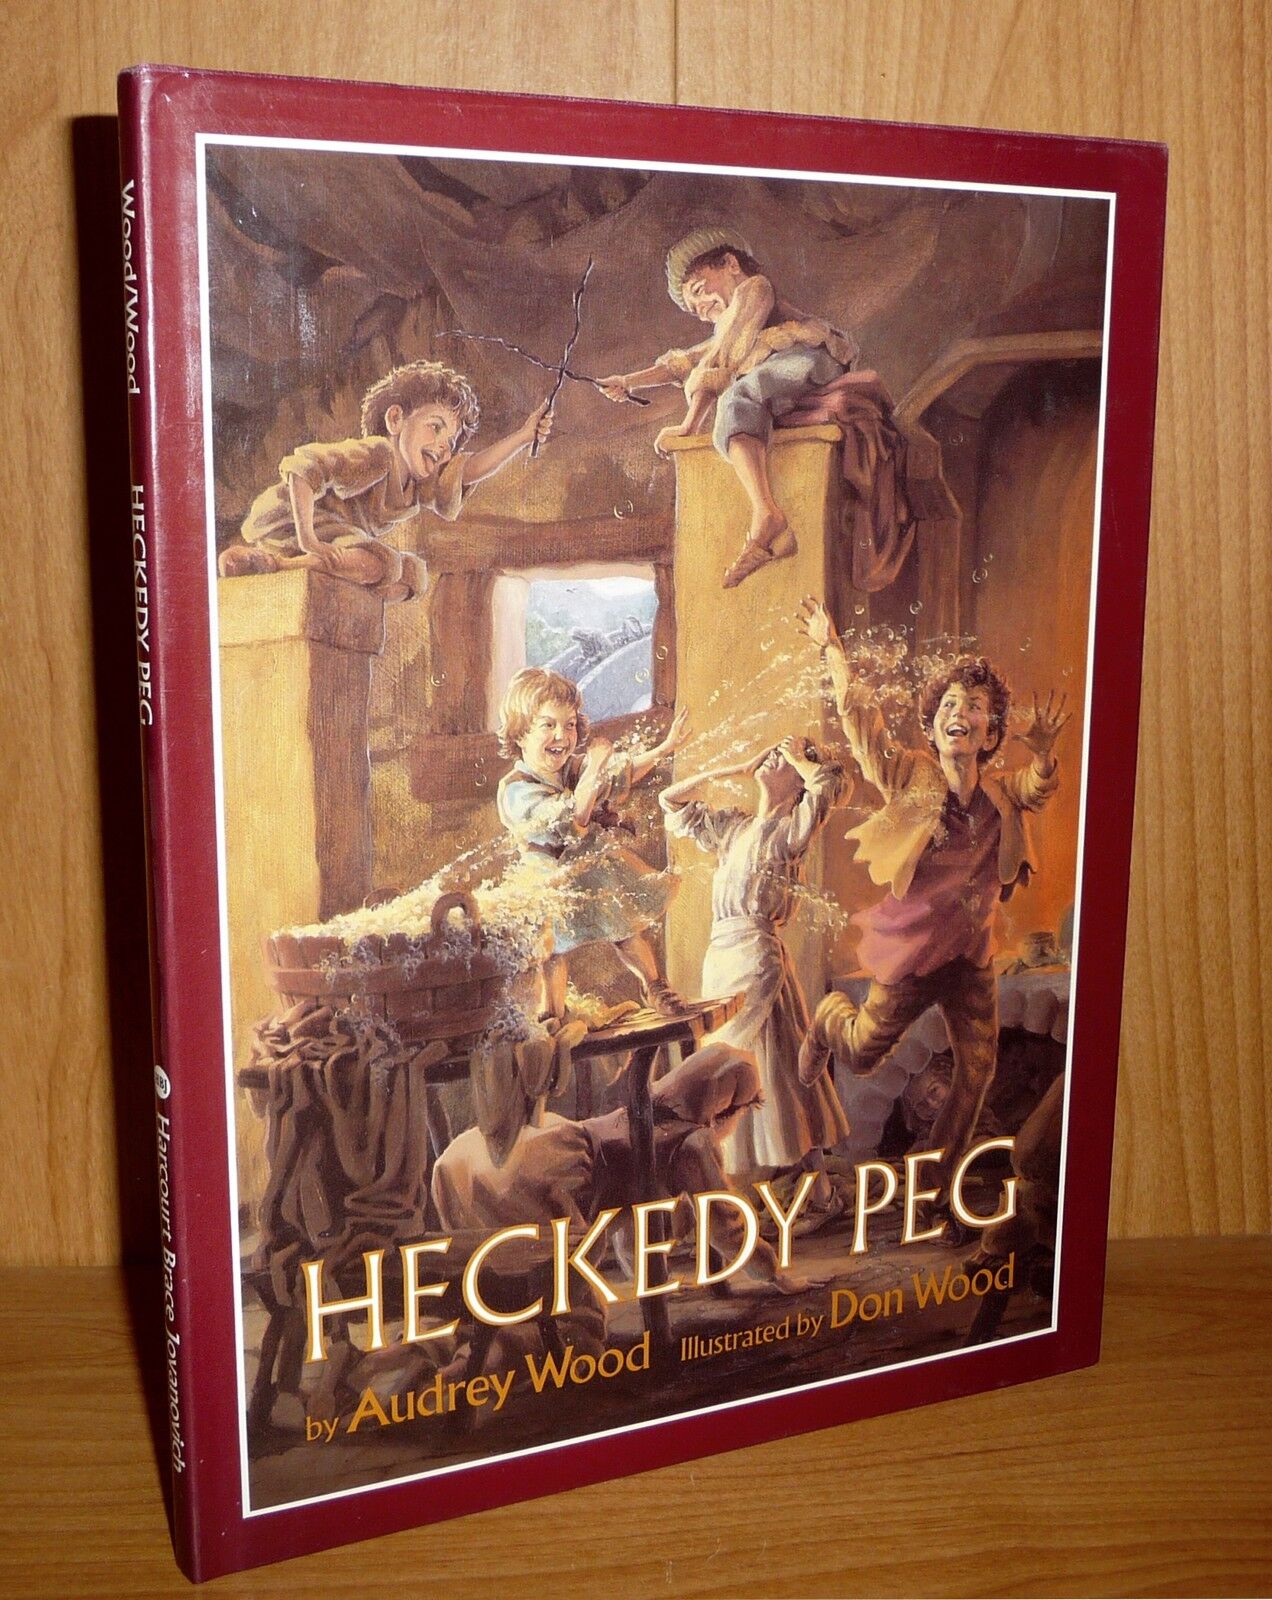 HECKEDY PEG by Audrey Wood. ILLUSTRATED by Don Wood. TRUE HB 1st SCARCE 